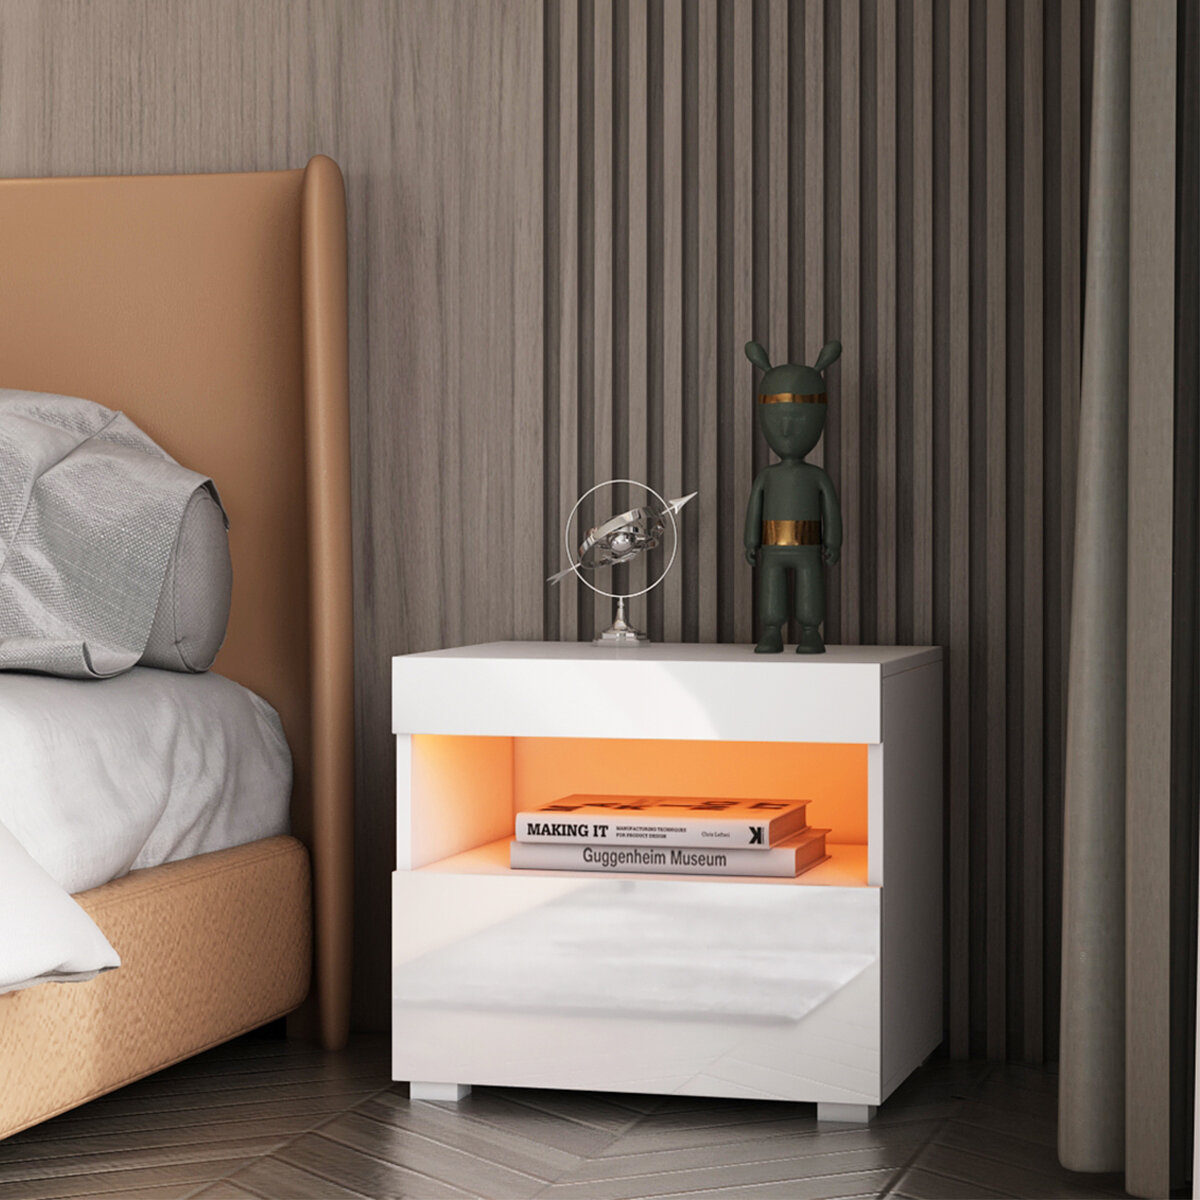 Image of Woodyhome 20 Light Modes Nightstand Modern High Gloss Bedside Table Cabinet With Two Drawers for Home and Office